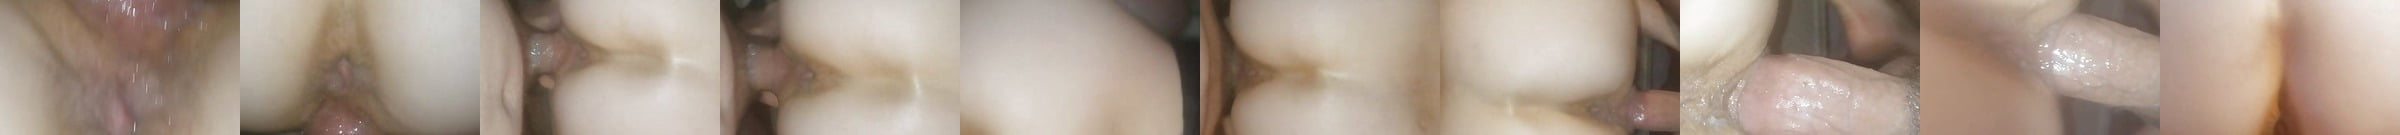 Featured American Hd Porn Videos 107 Xhamster